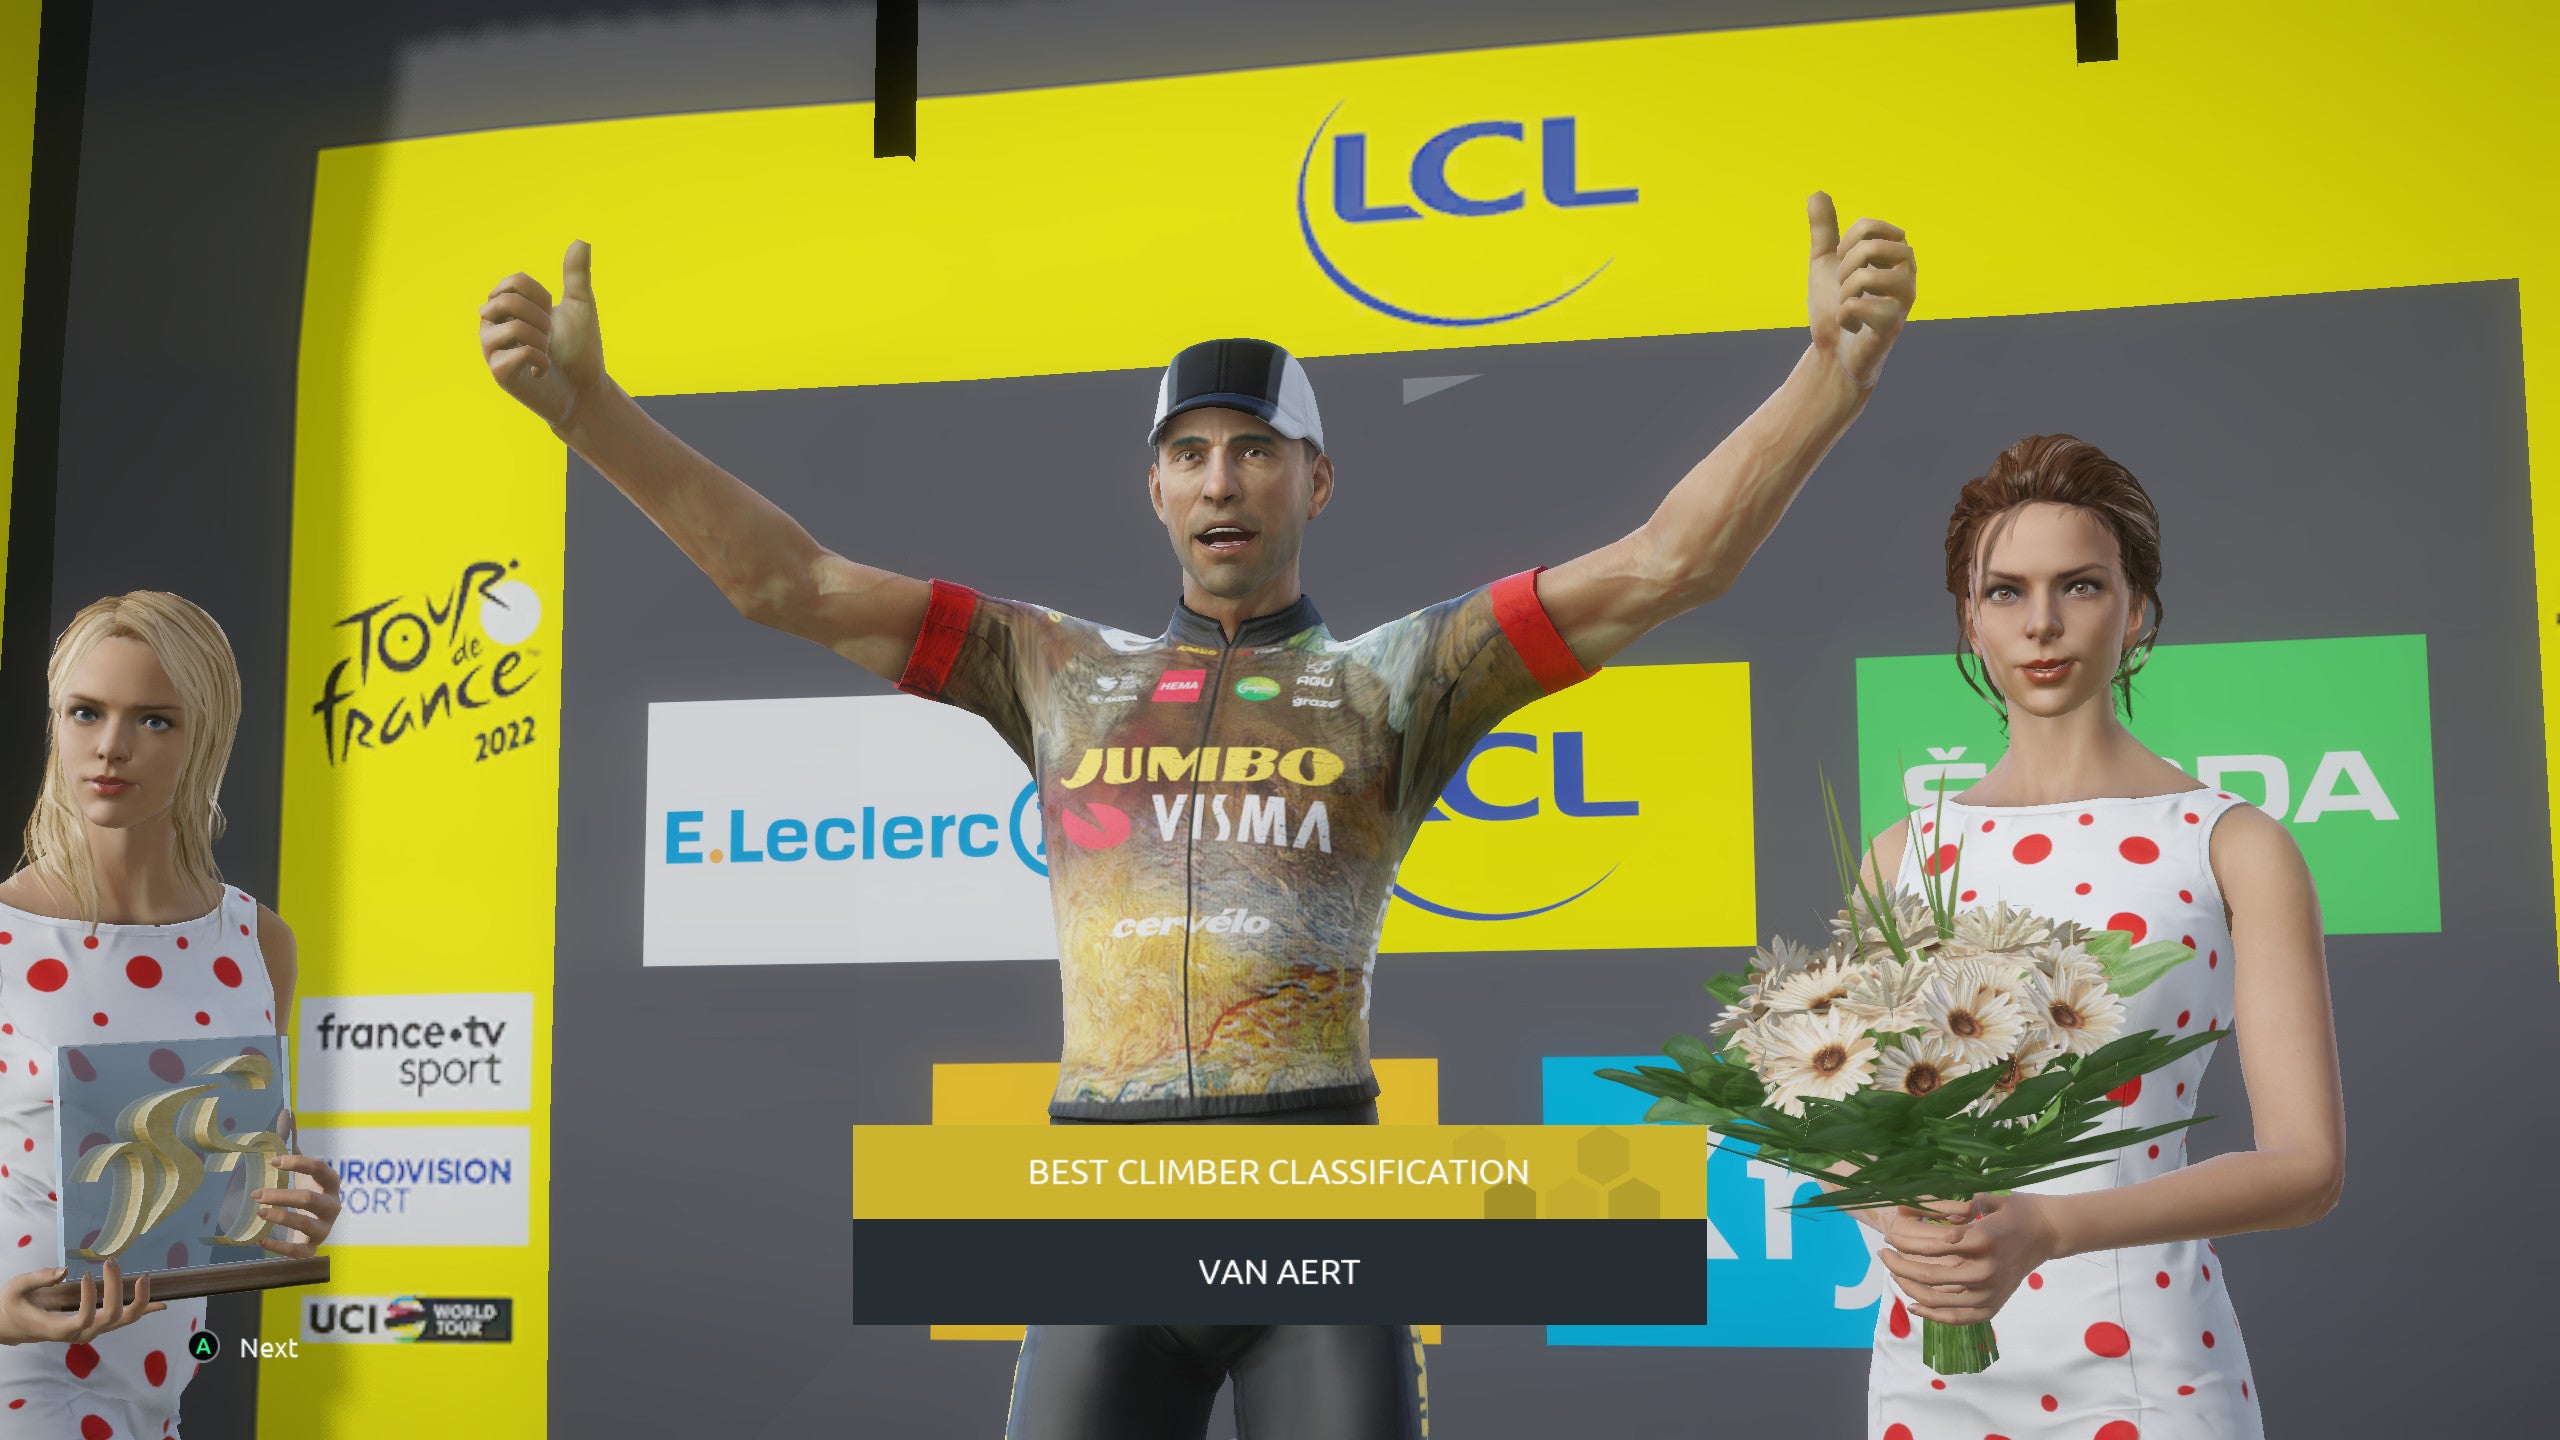 Lookalikes in the Tour de France 2022 video game.